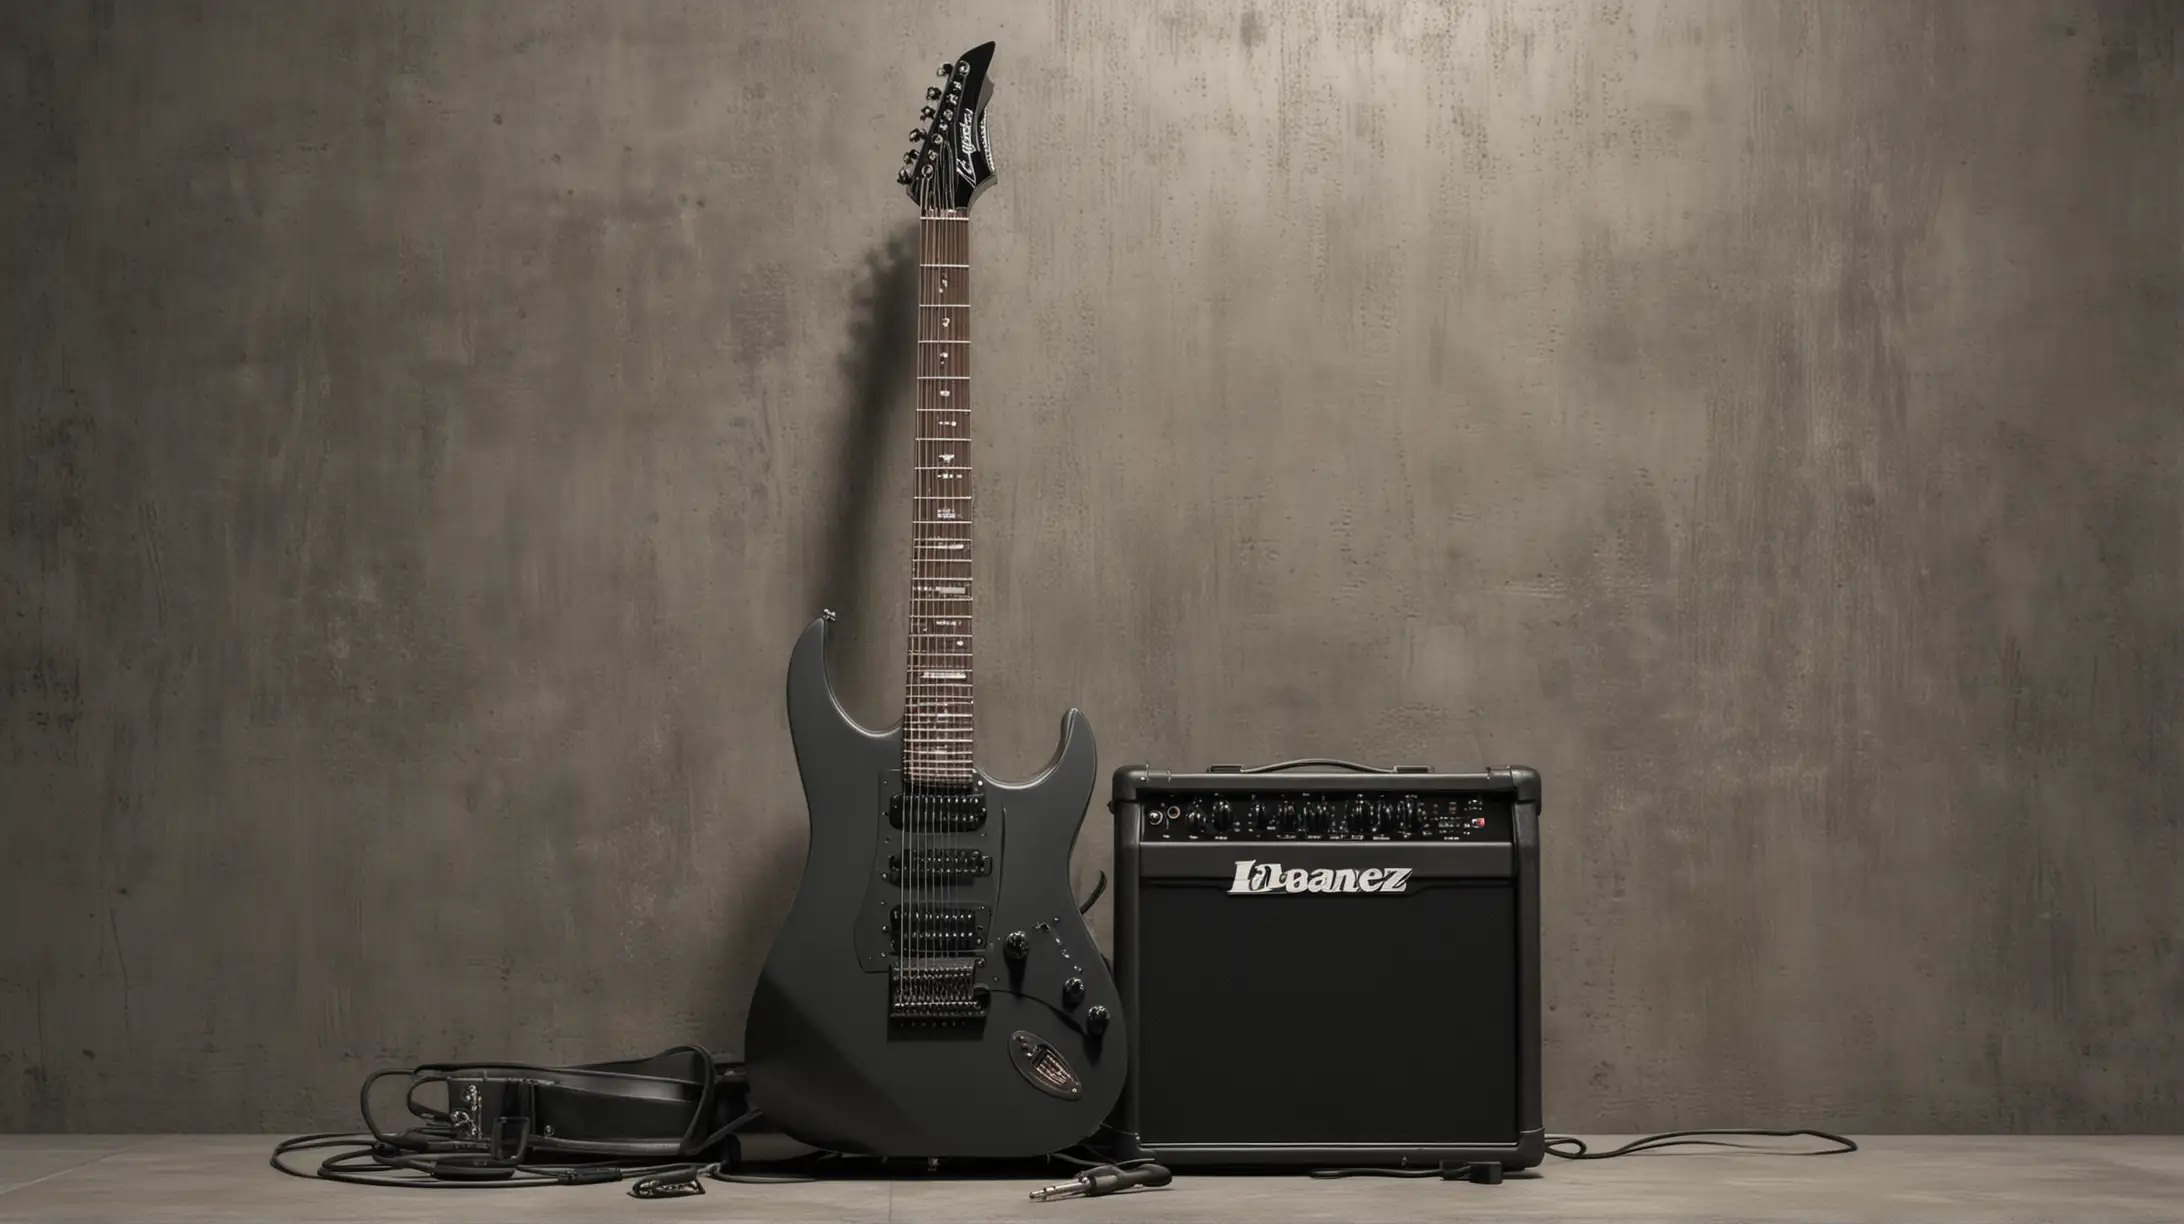 ibanez metal six string realistic electric guitar against a metal wall, on amplifier and two boots